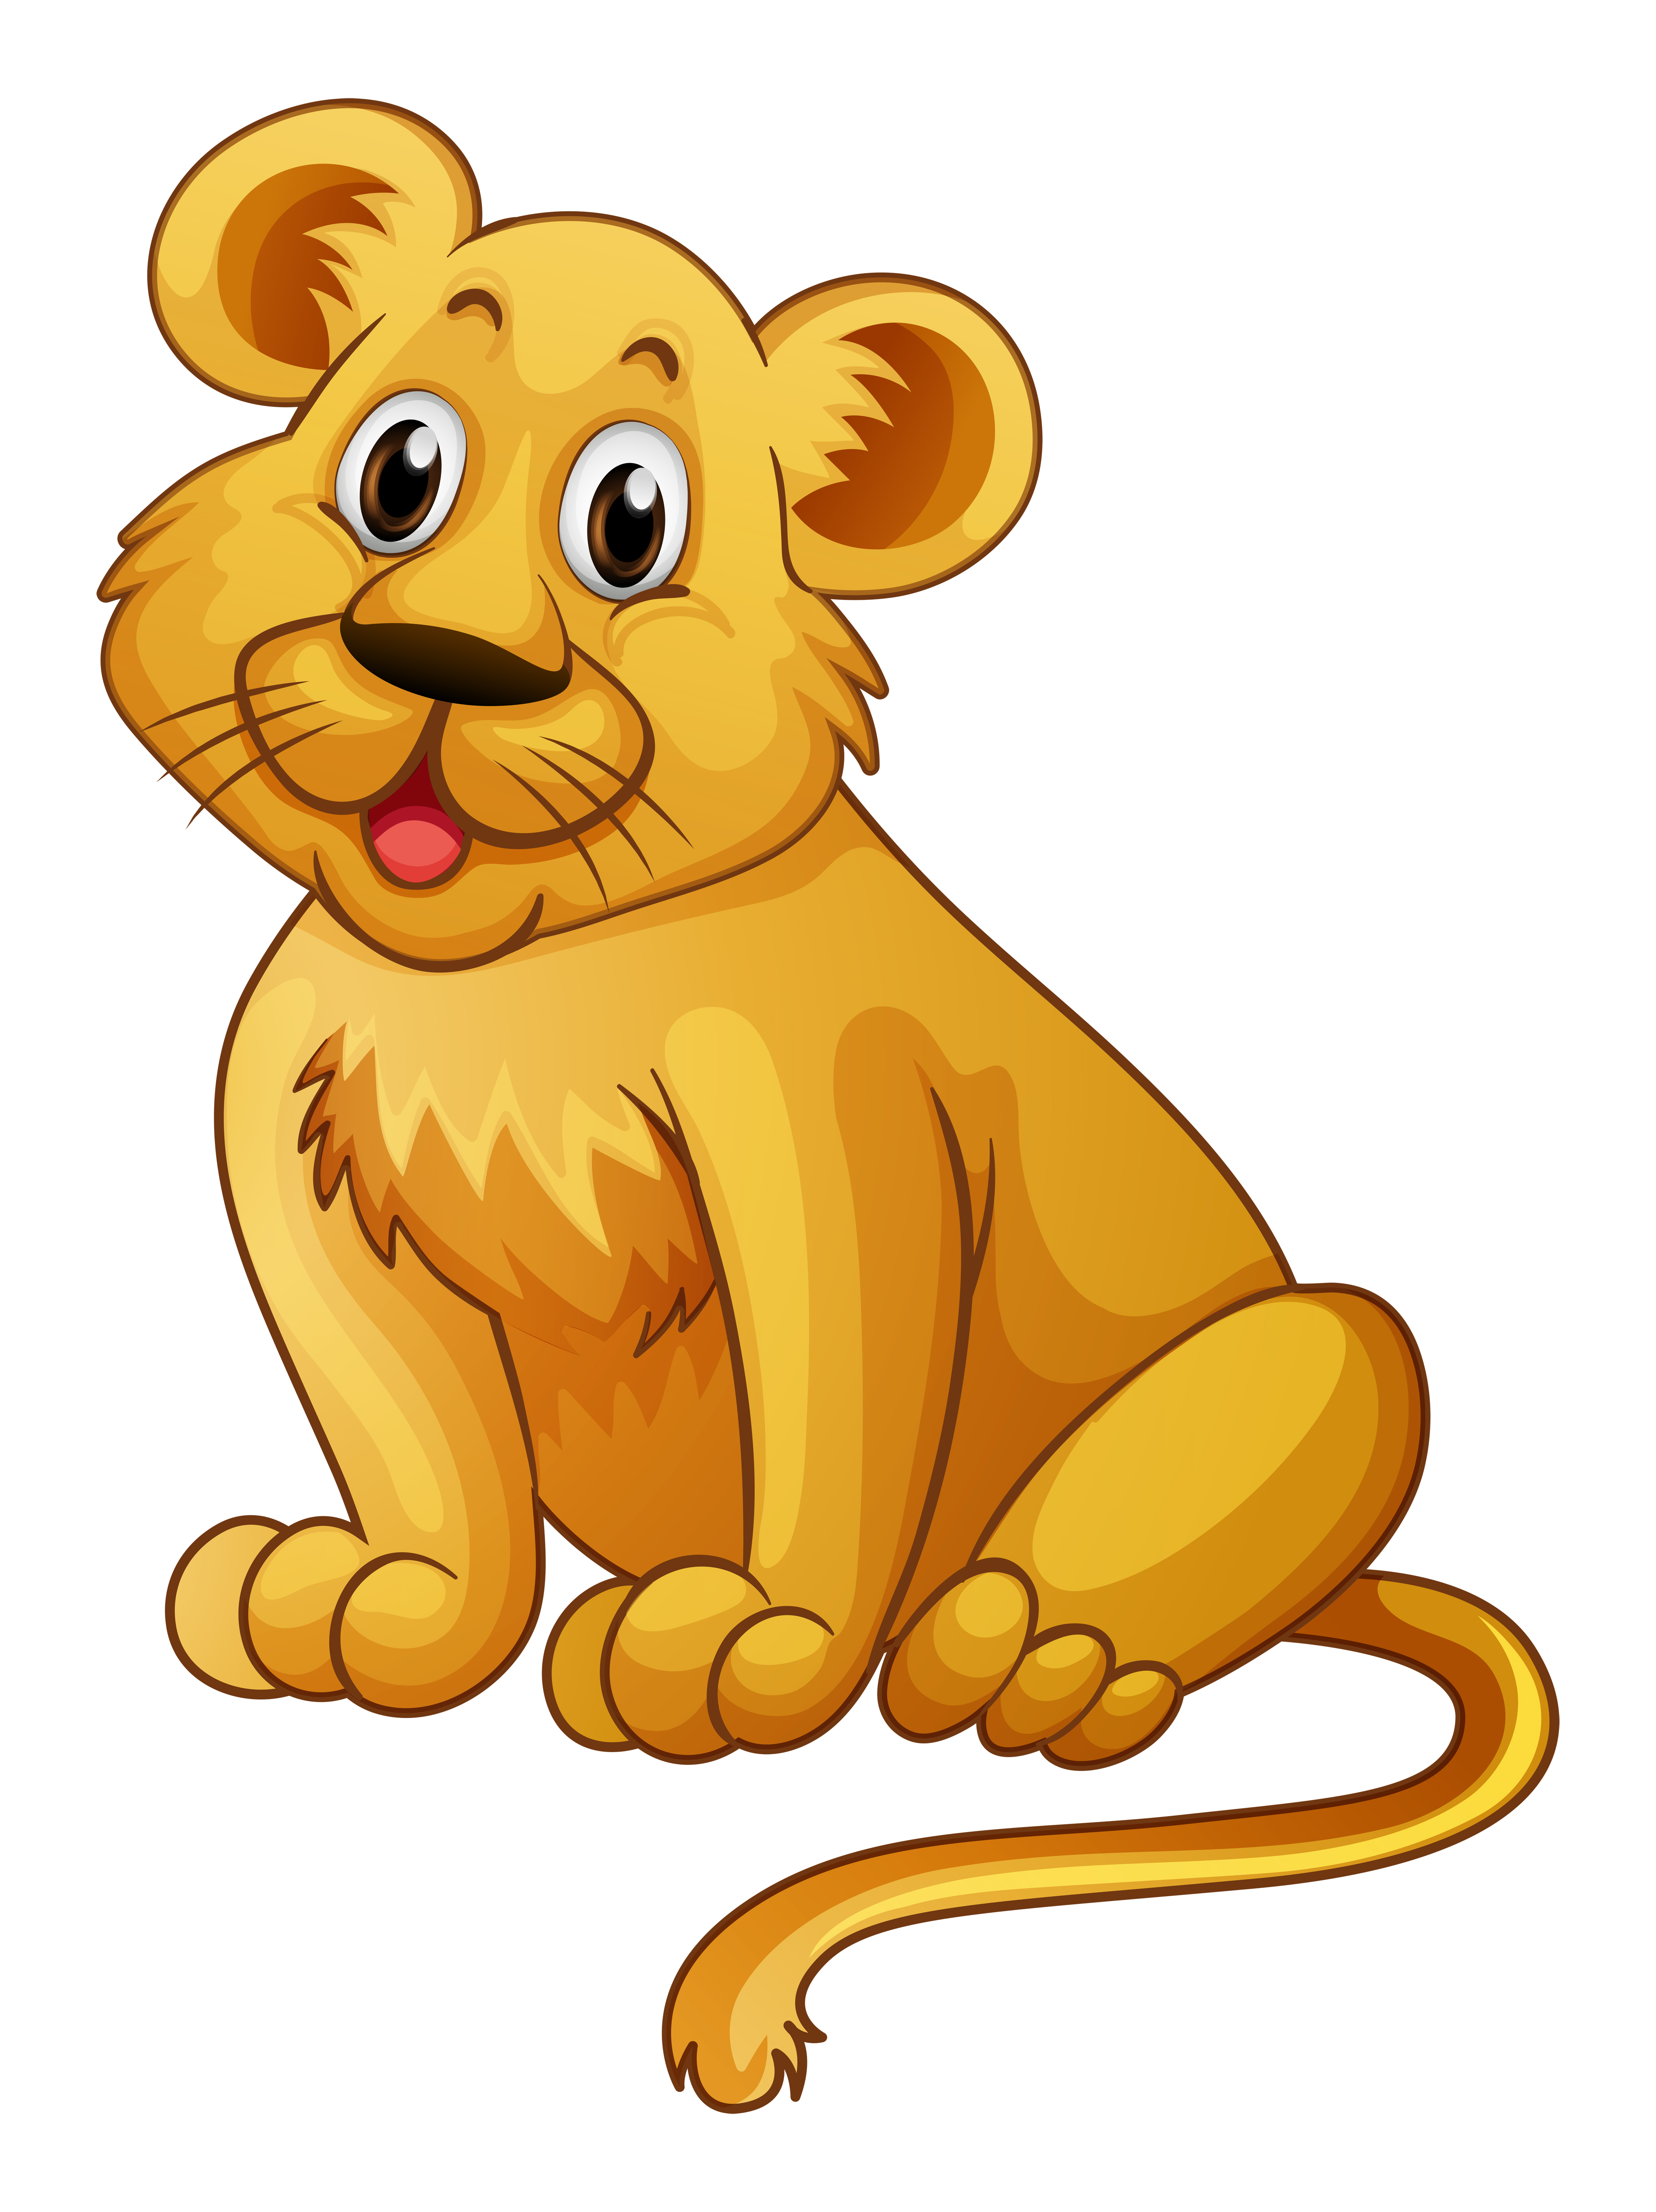 Little lion with happy face - Download Free Vectors ...